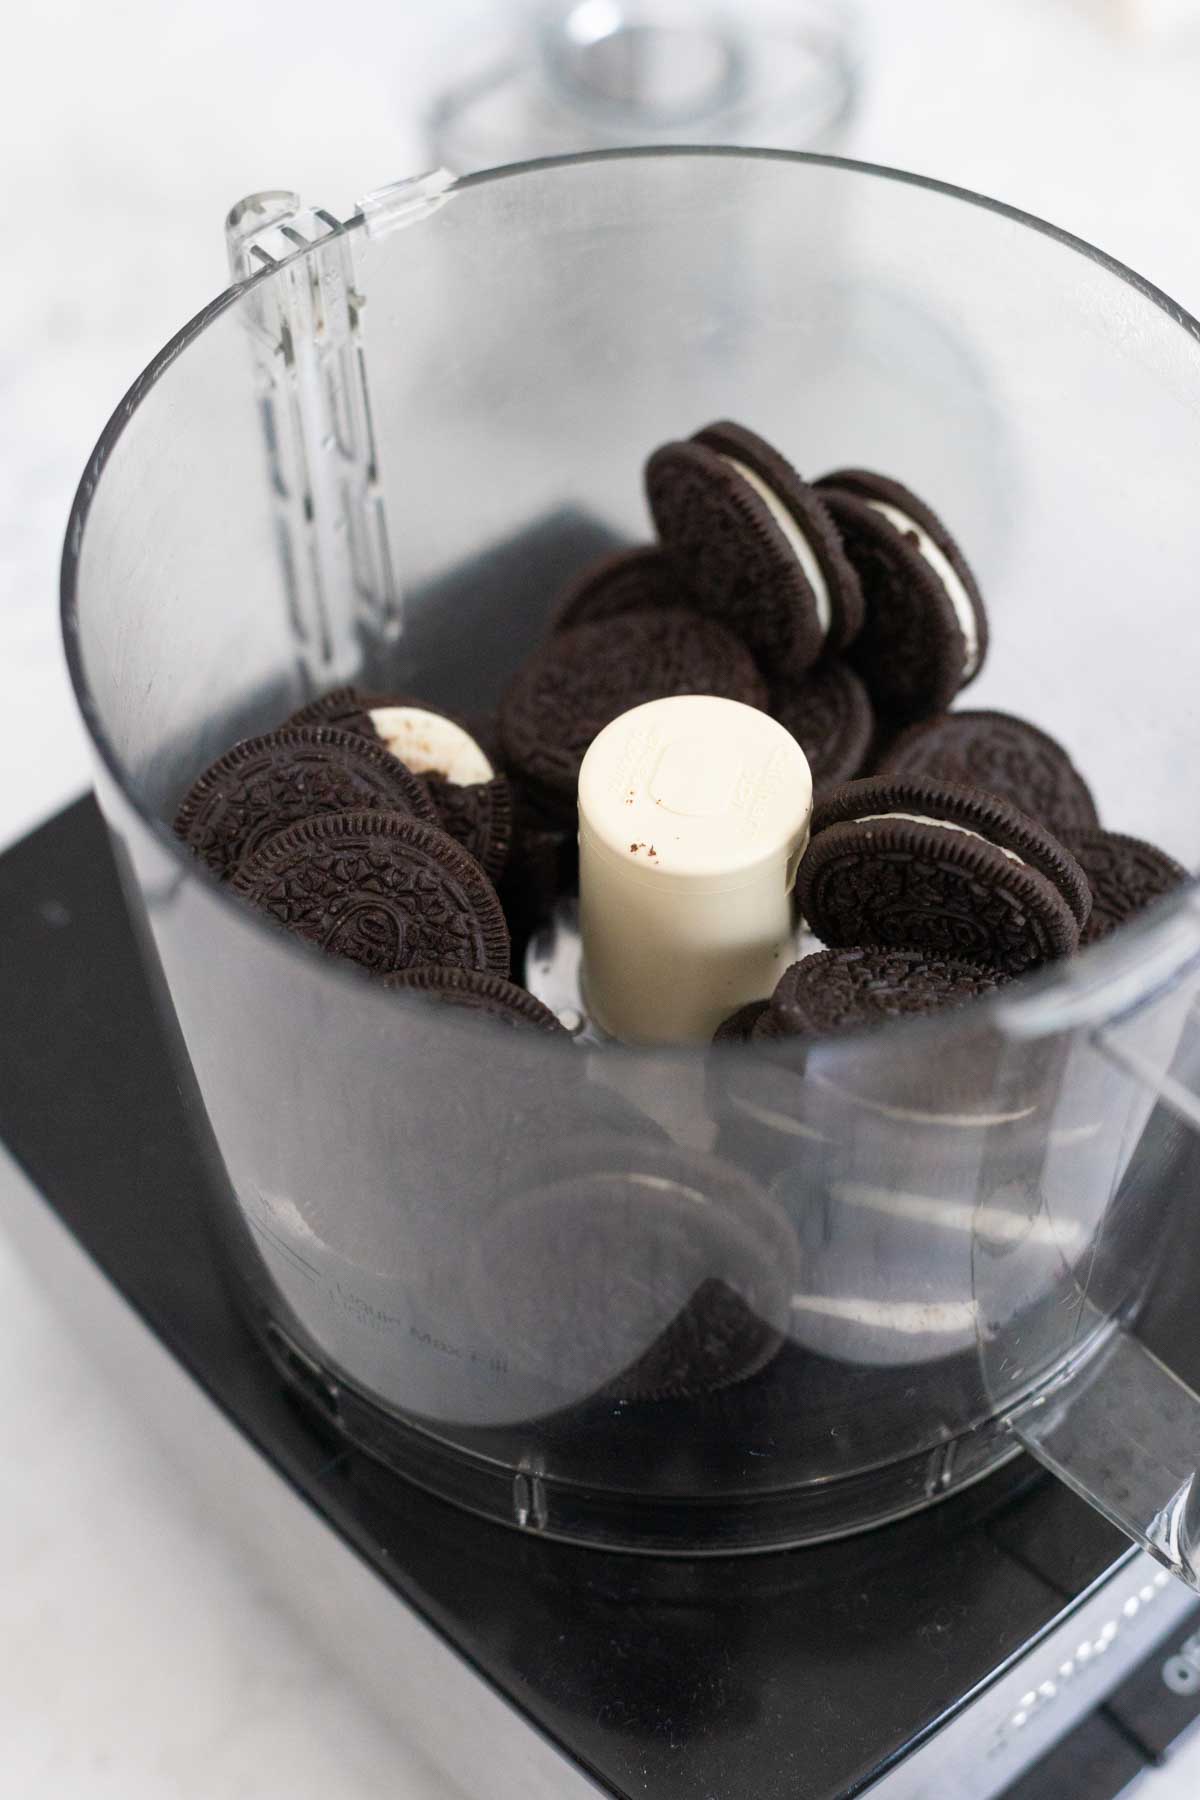 The Oreo cookies have been added to the bowl of a food processor.